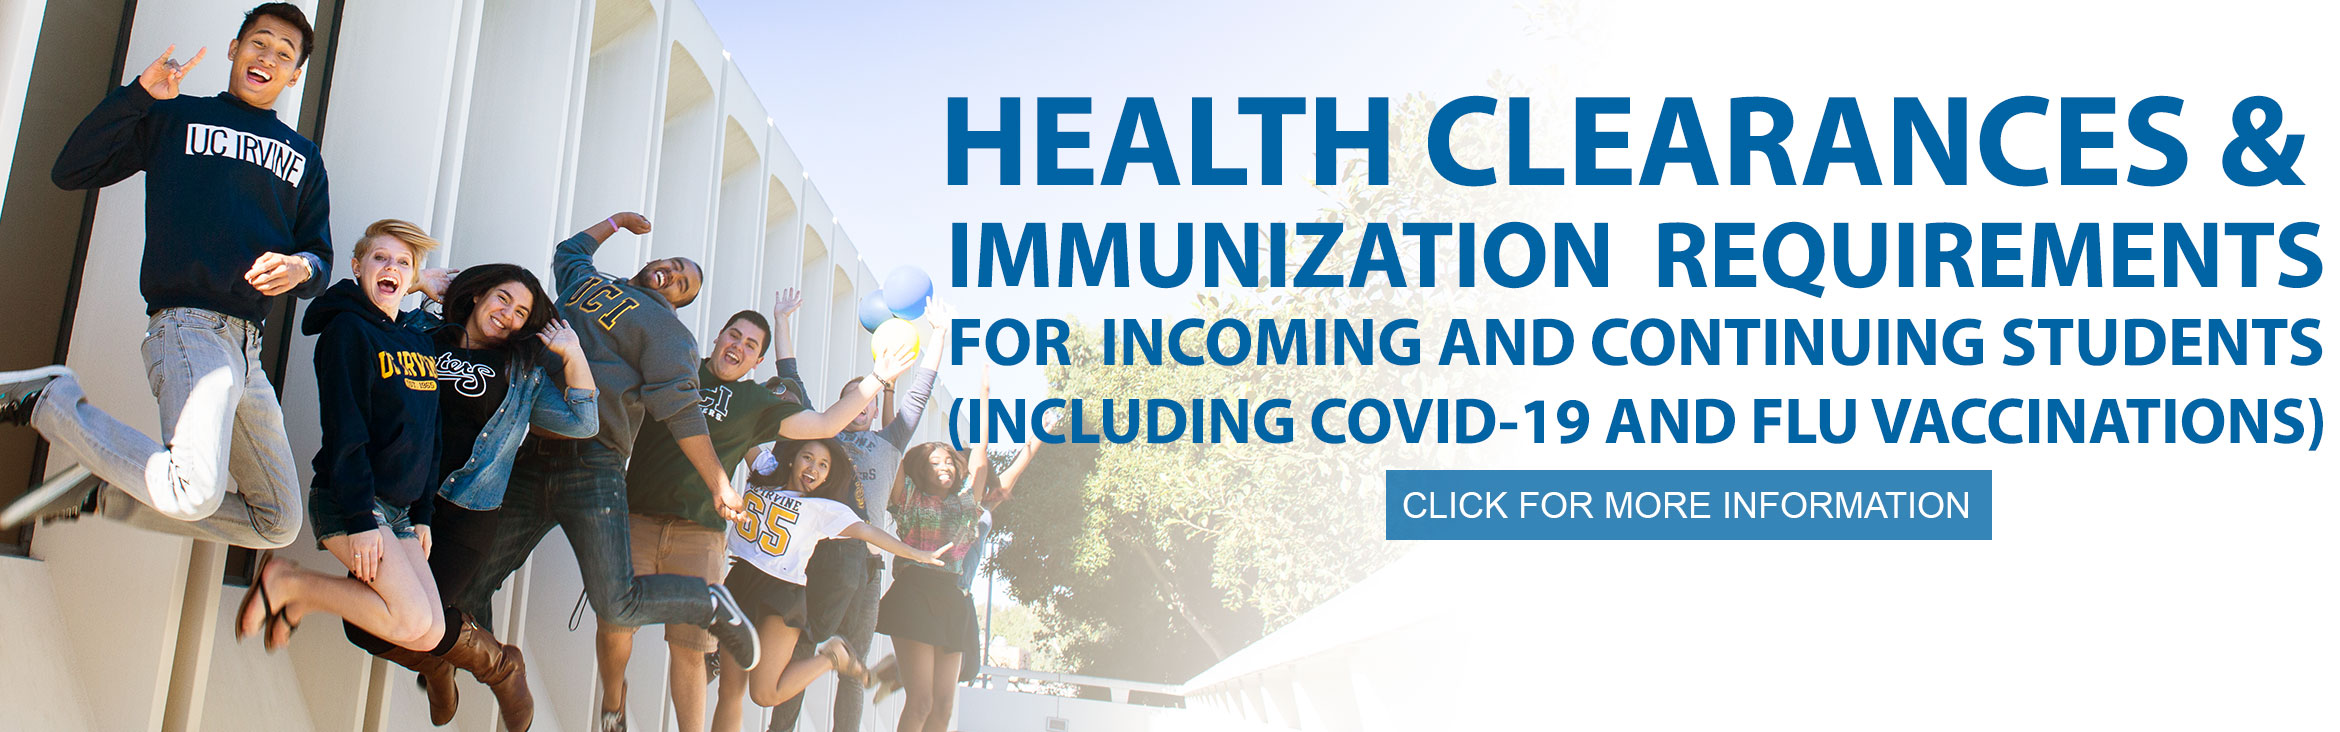 HEALTH CLEARANCES &  IMMUNIZATION  REQUIREMENTS FOR  INCOMING AND CONTINUING STUDENTS (INCLUDING COVID-19 AND FLU VACCINATIONS)